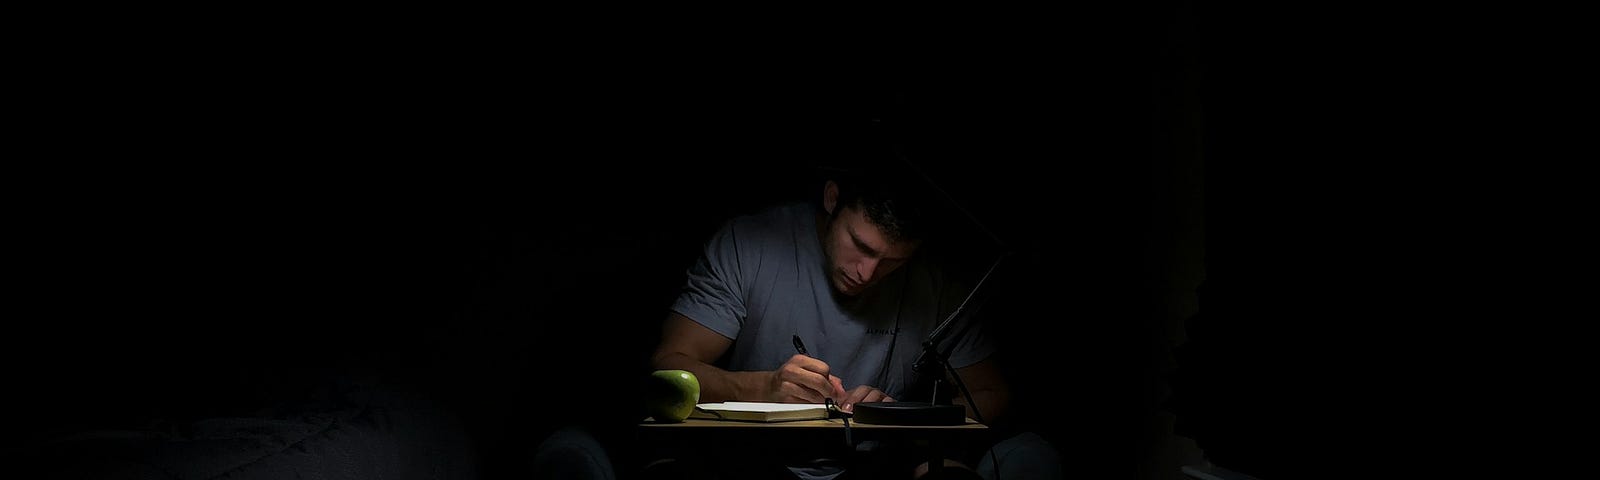 A writer is writing atop a small desk with a faint light.